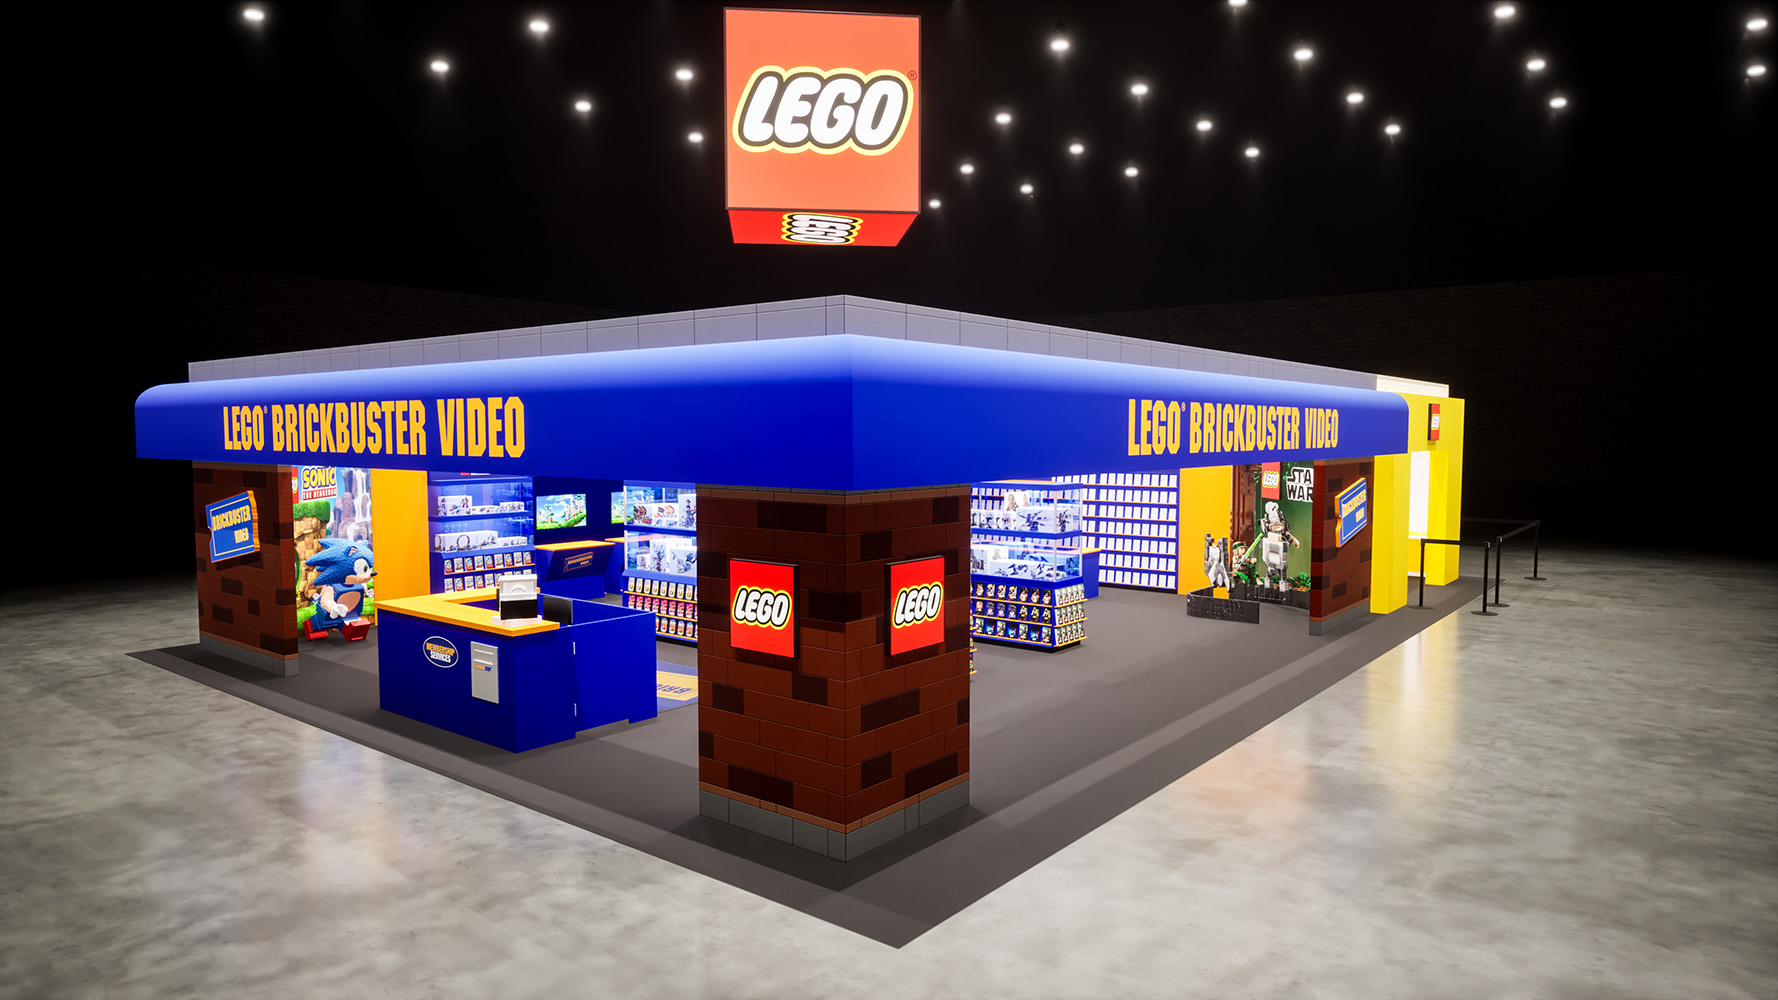 LEGO Stranger Things at San Diego Comic Con sees designer signing